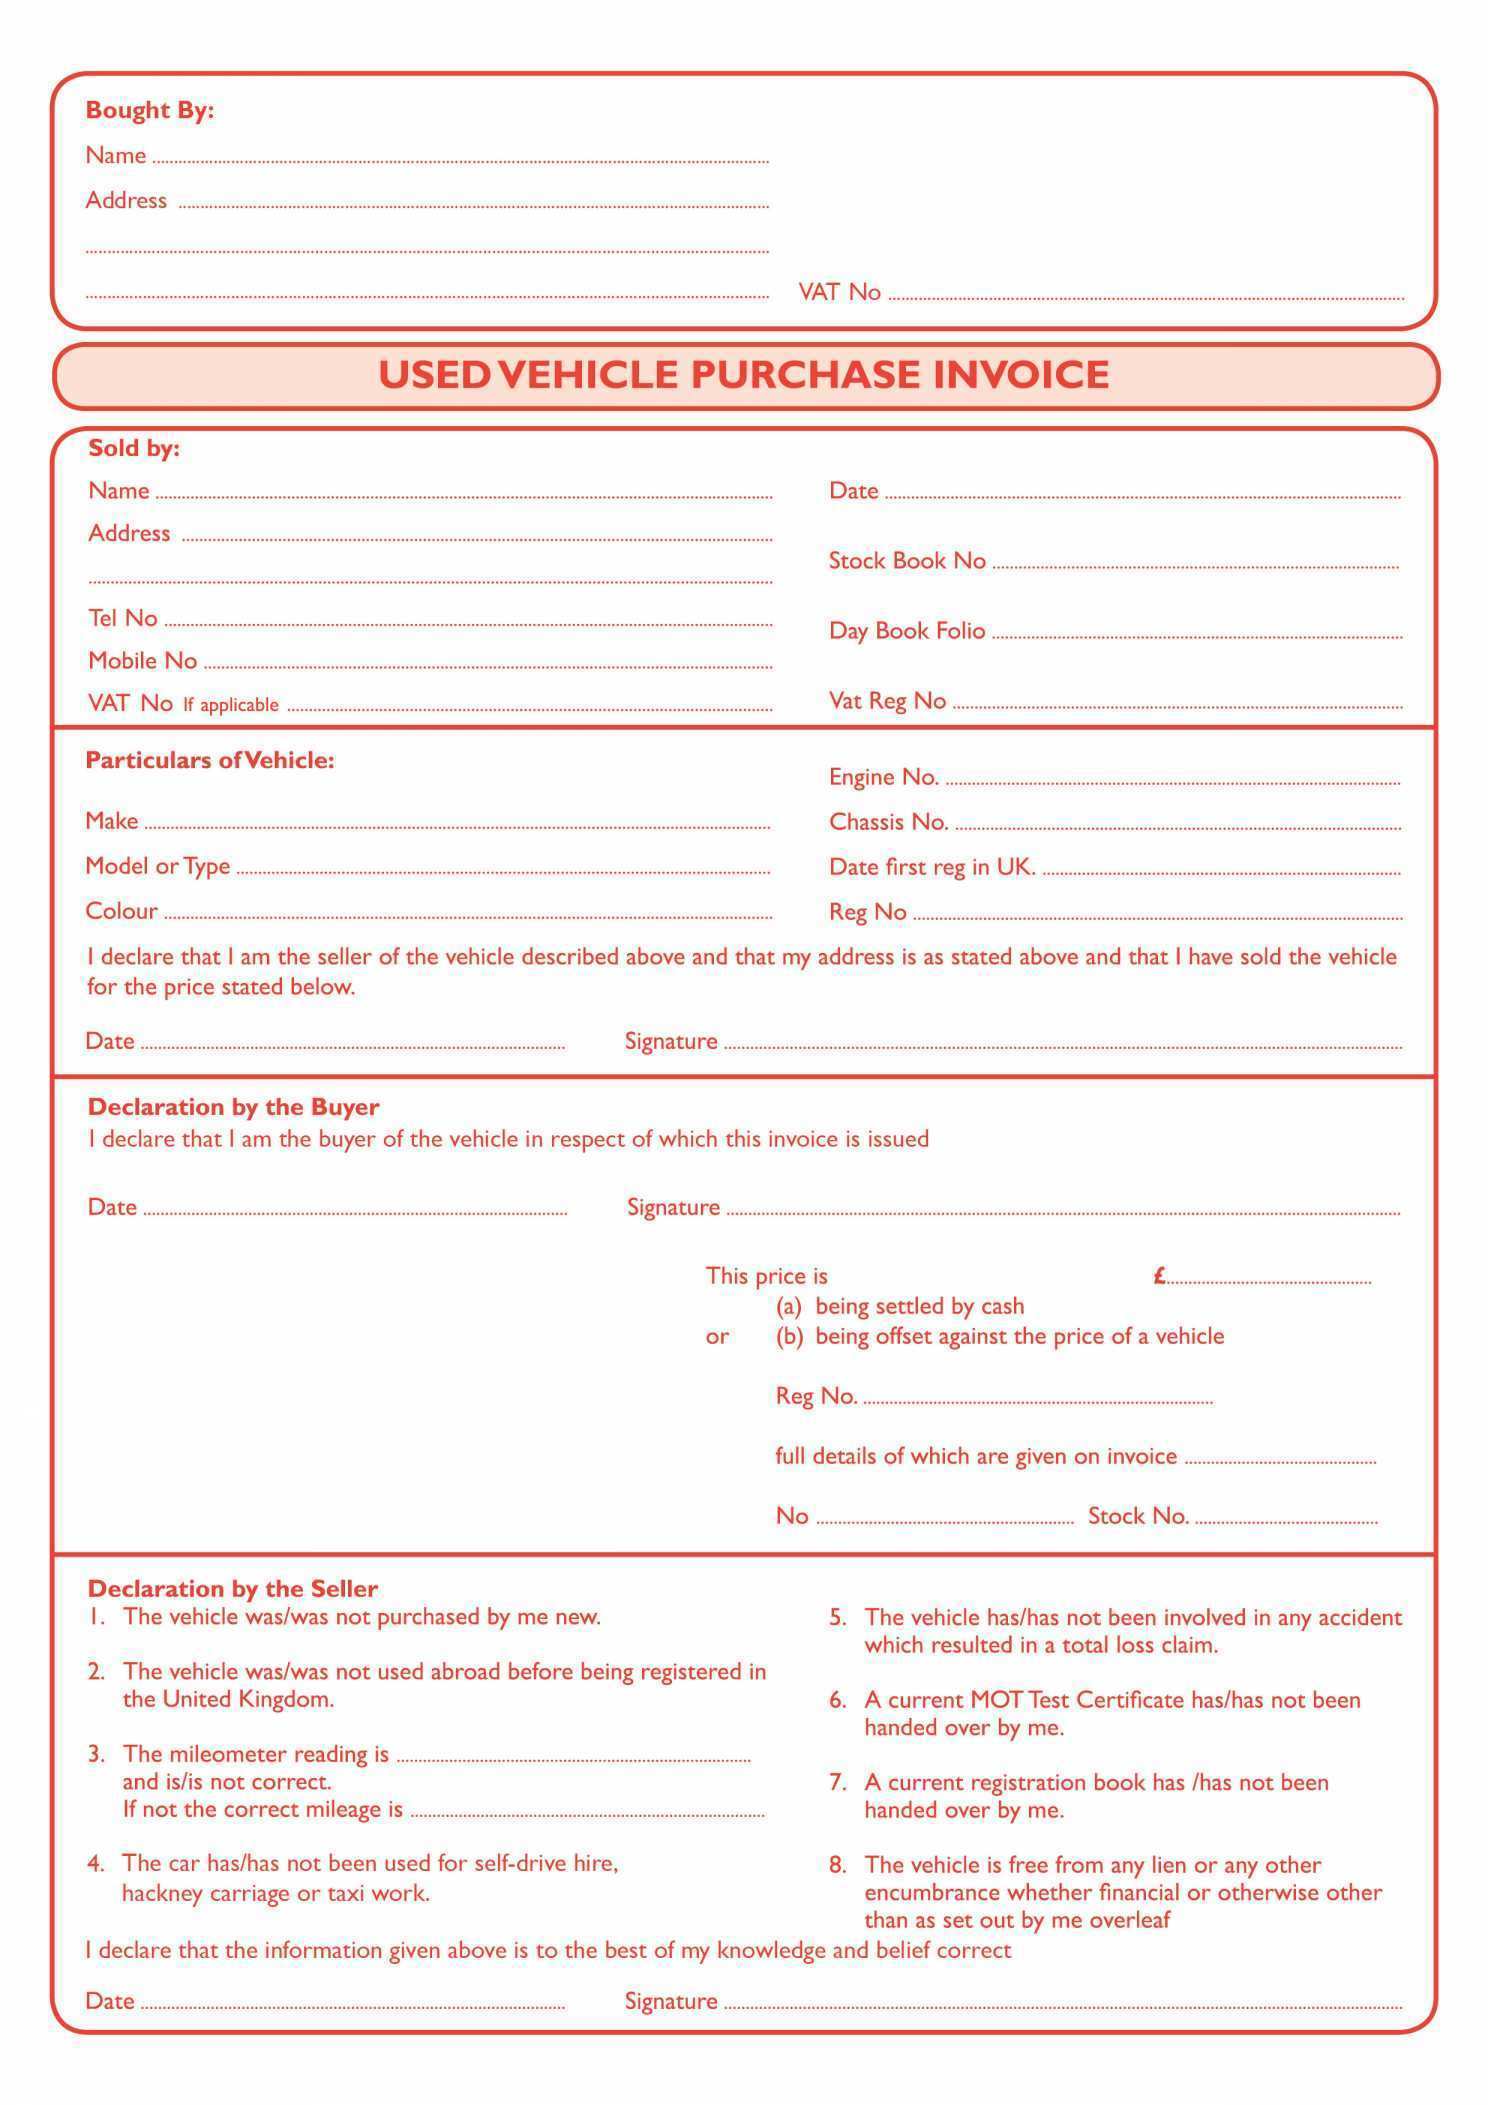 11 Standard Car Invoice Template With Stunning Design by Car Invoice Template